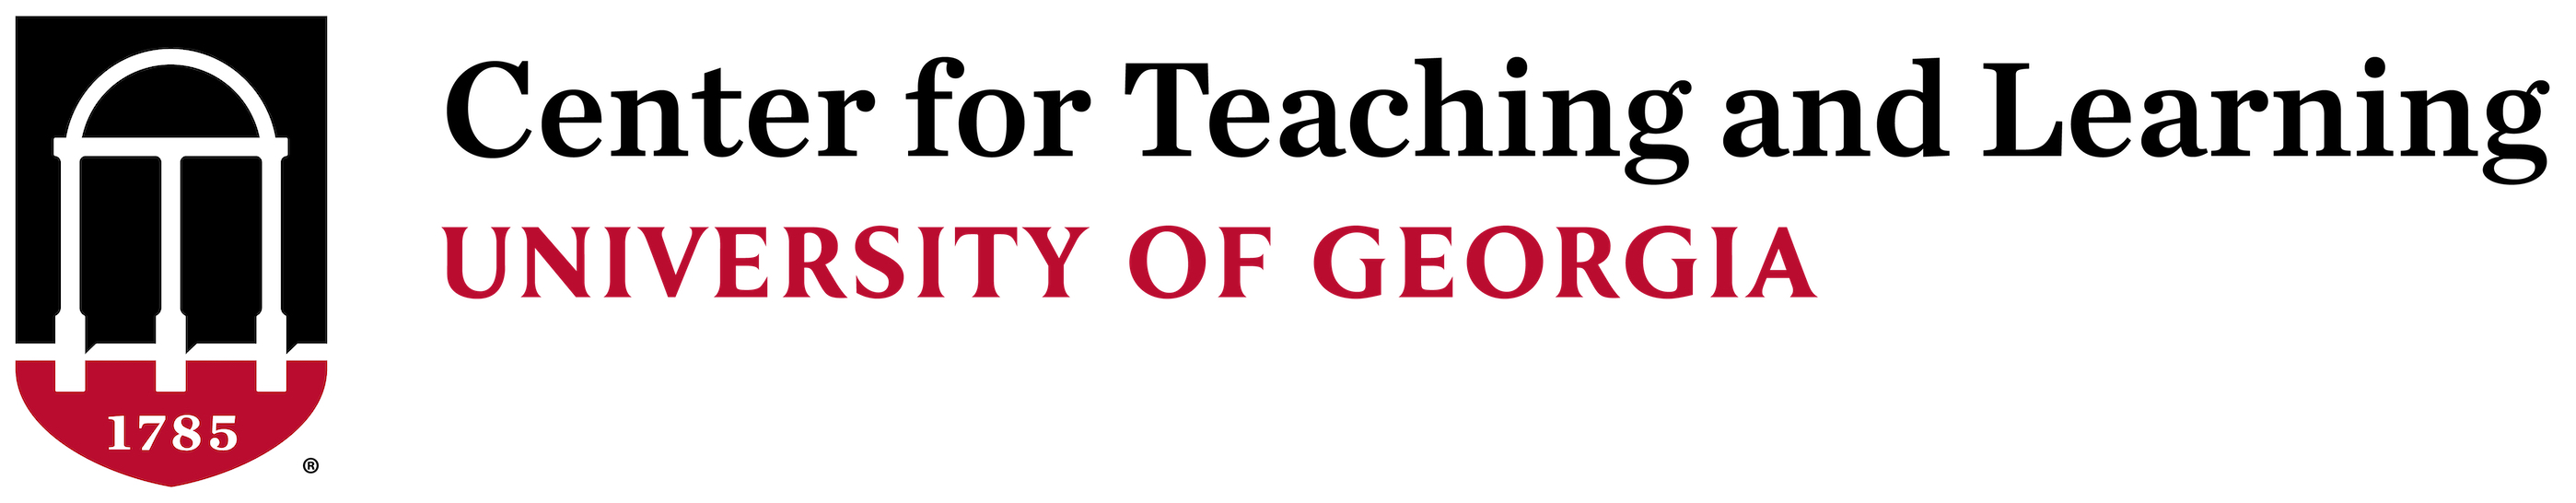 Center for Teaching and Learning at the University of Georgia Logo